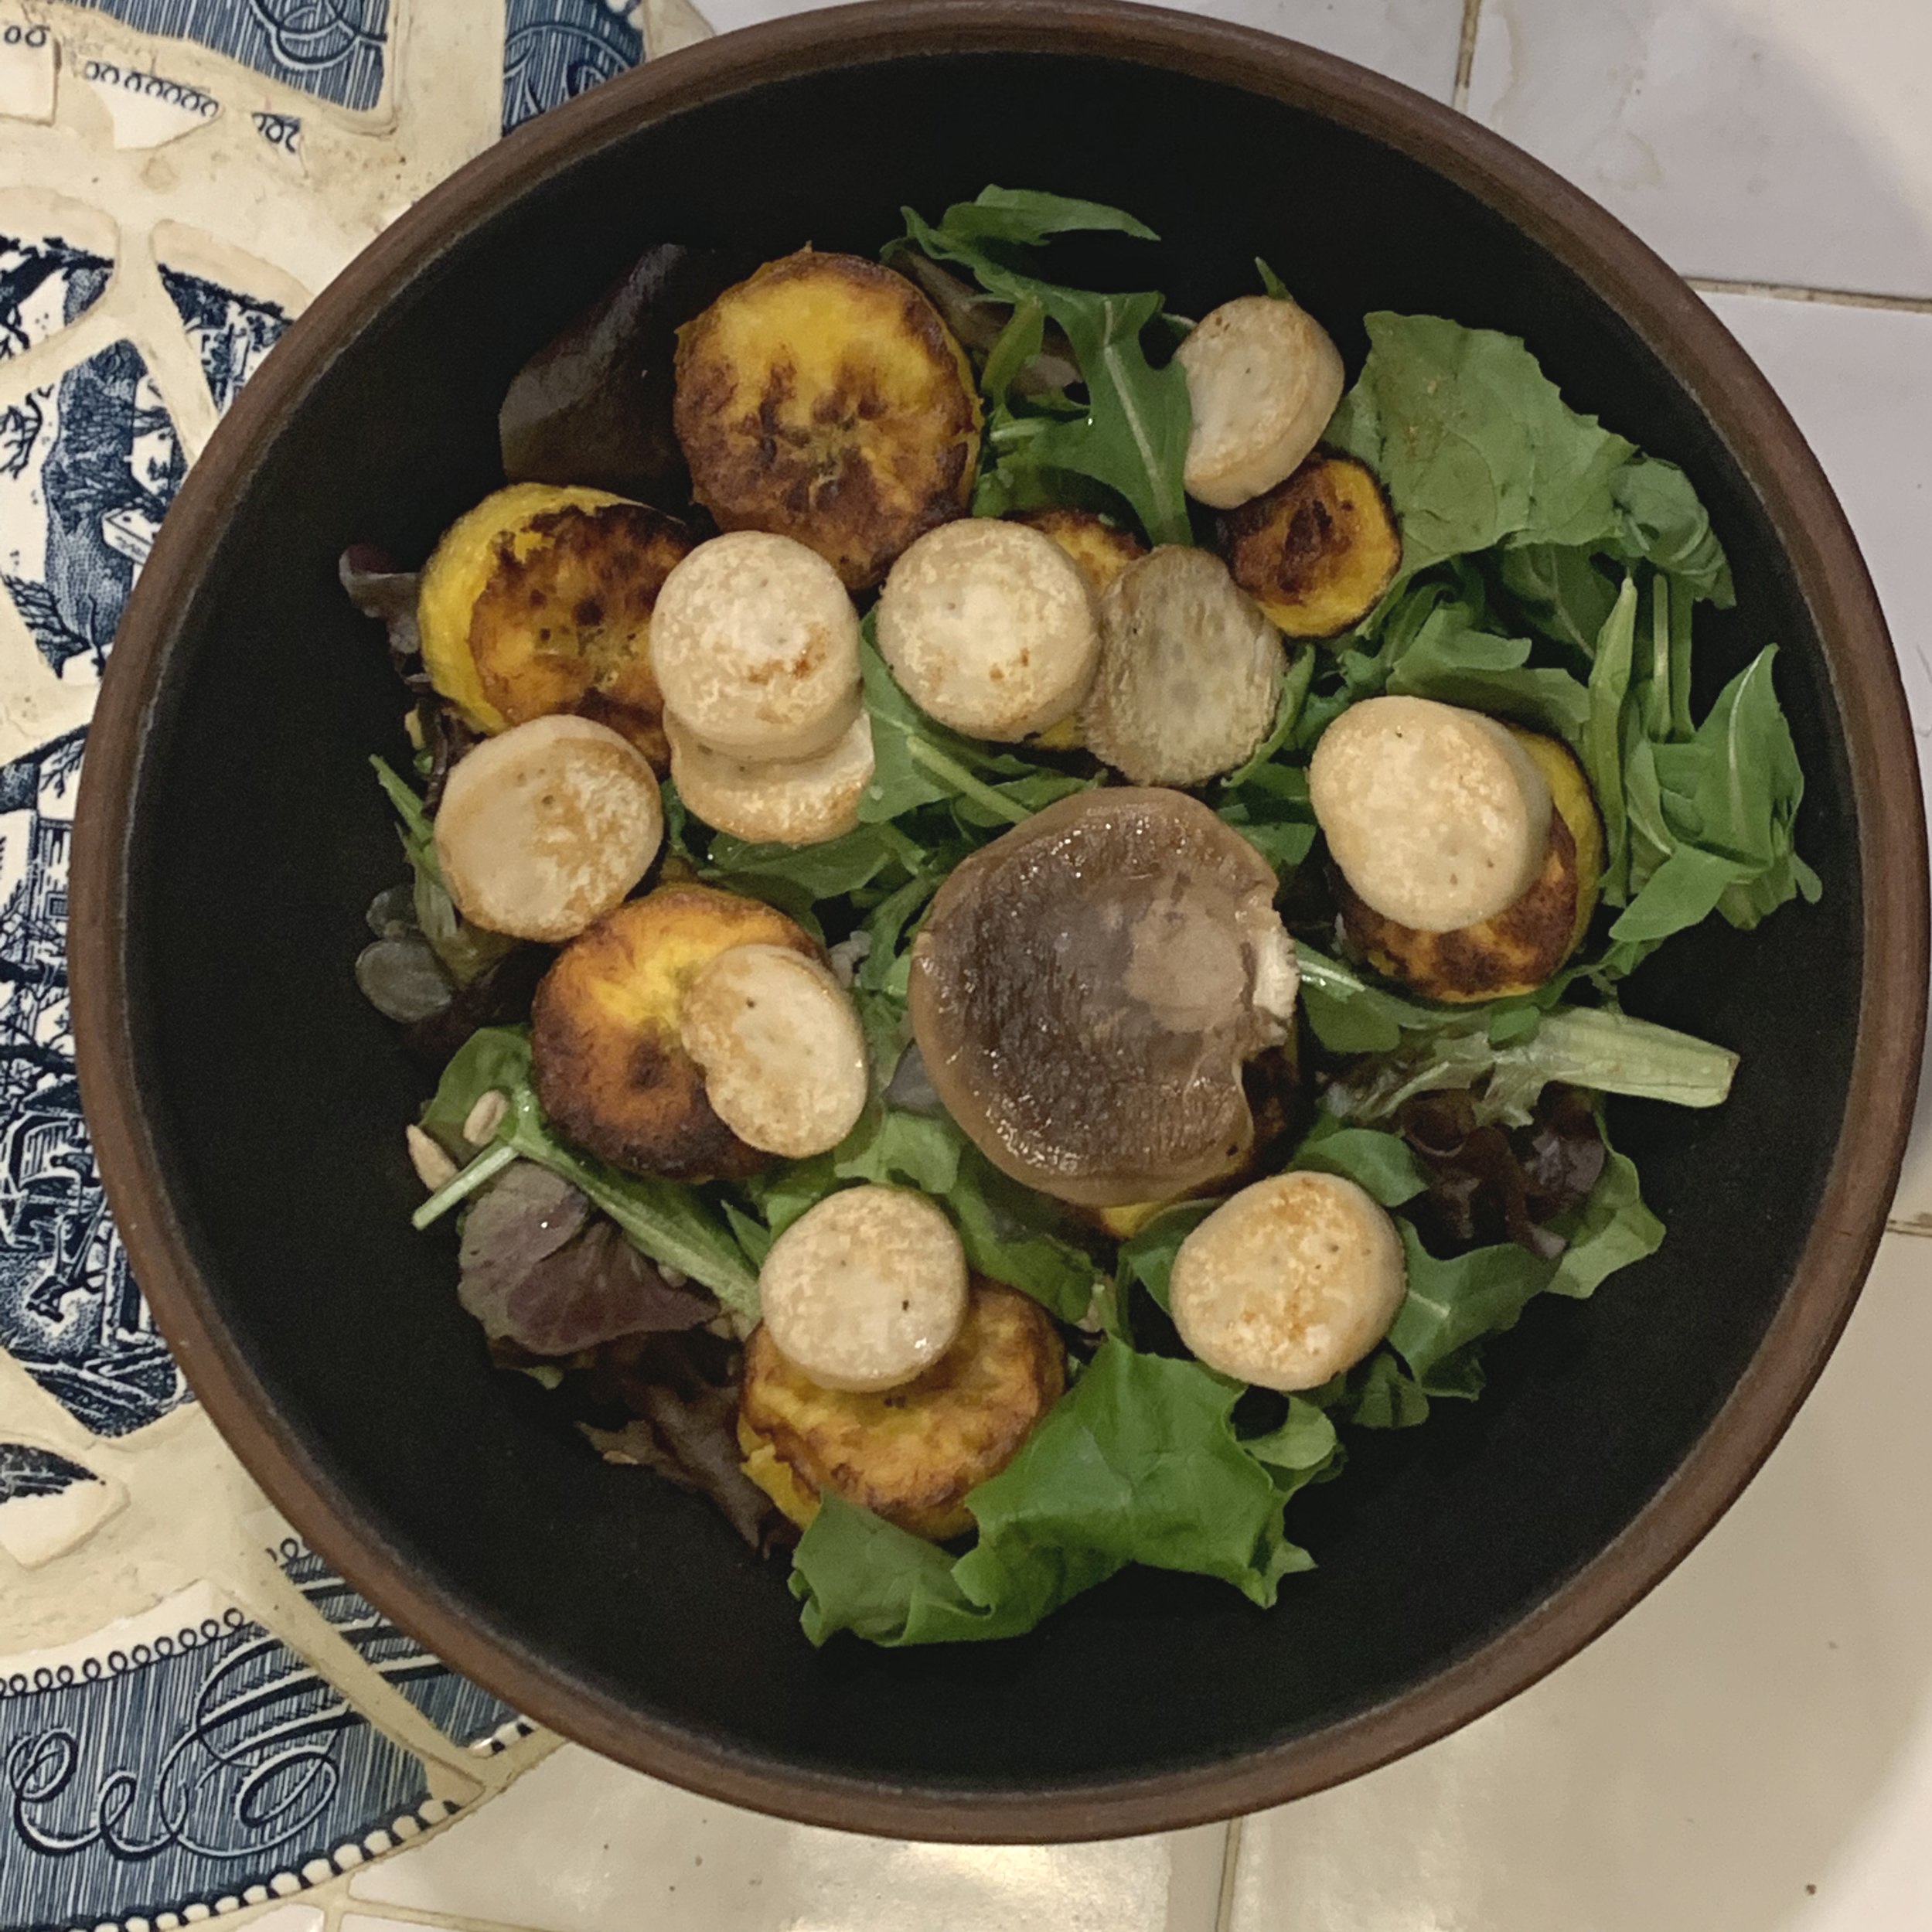 dry roasted trumped mushroom and plantain added to a spring mix salad